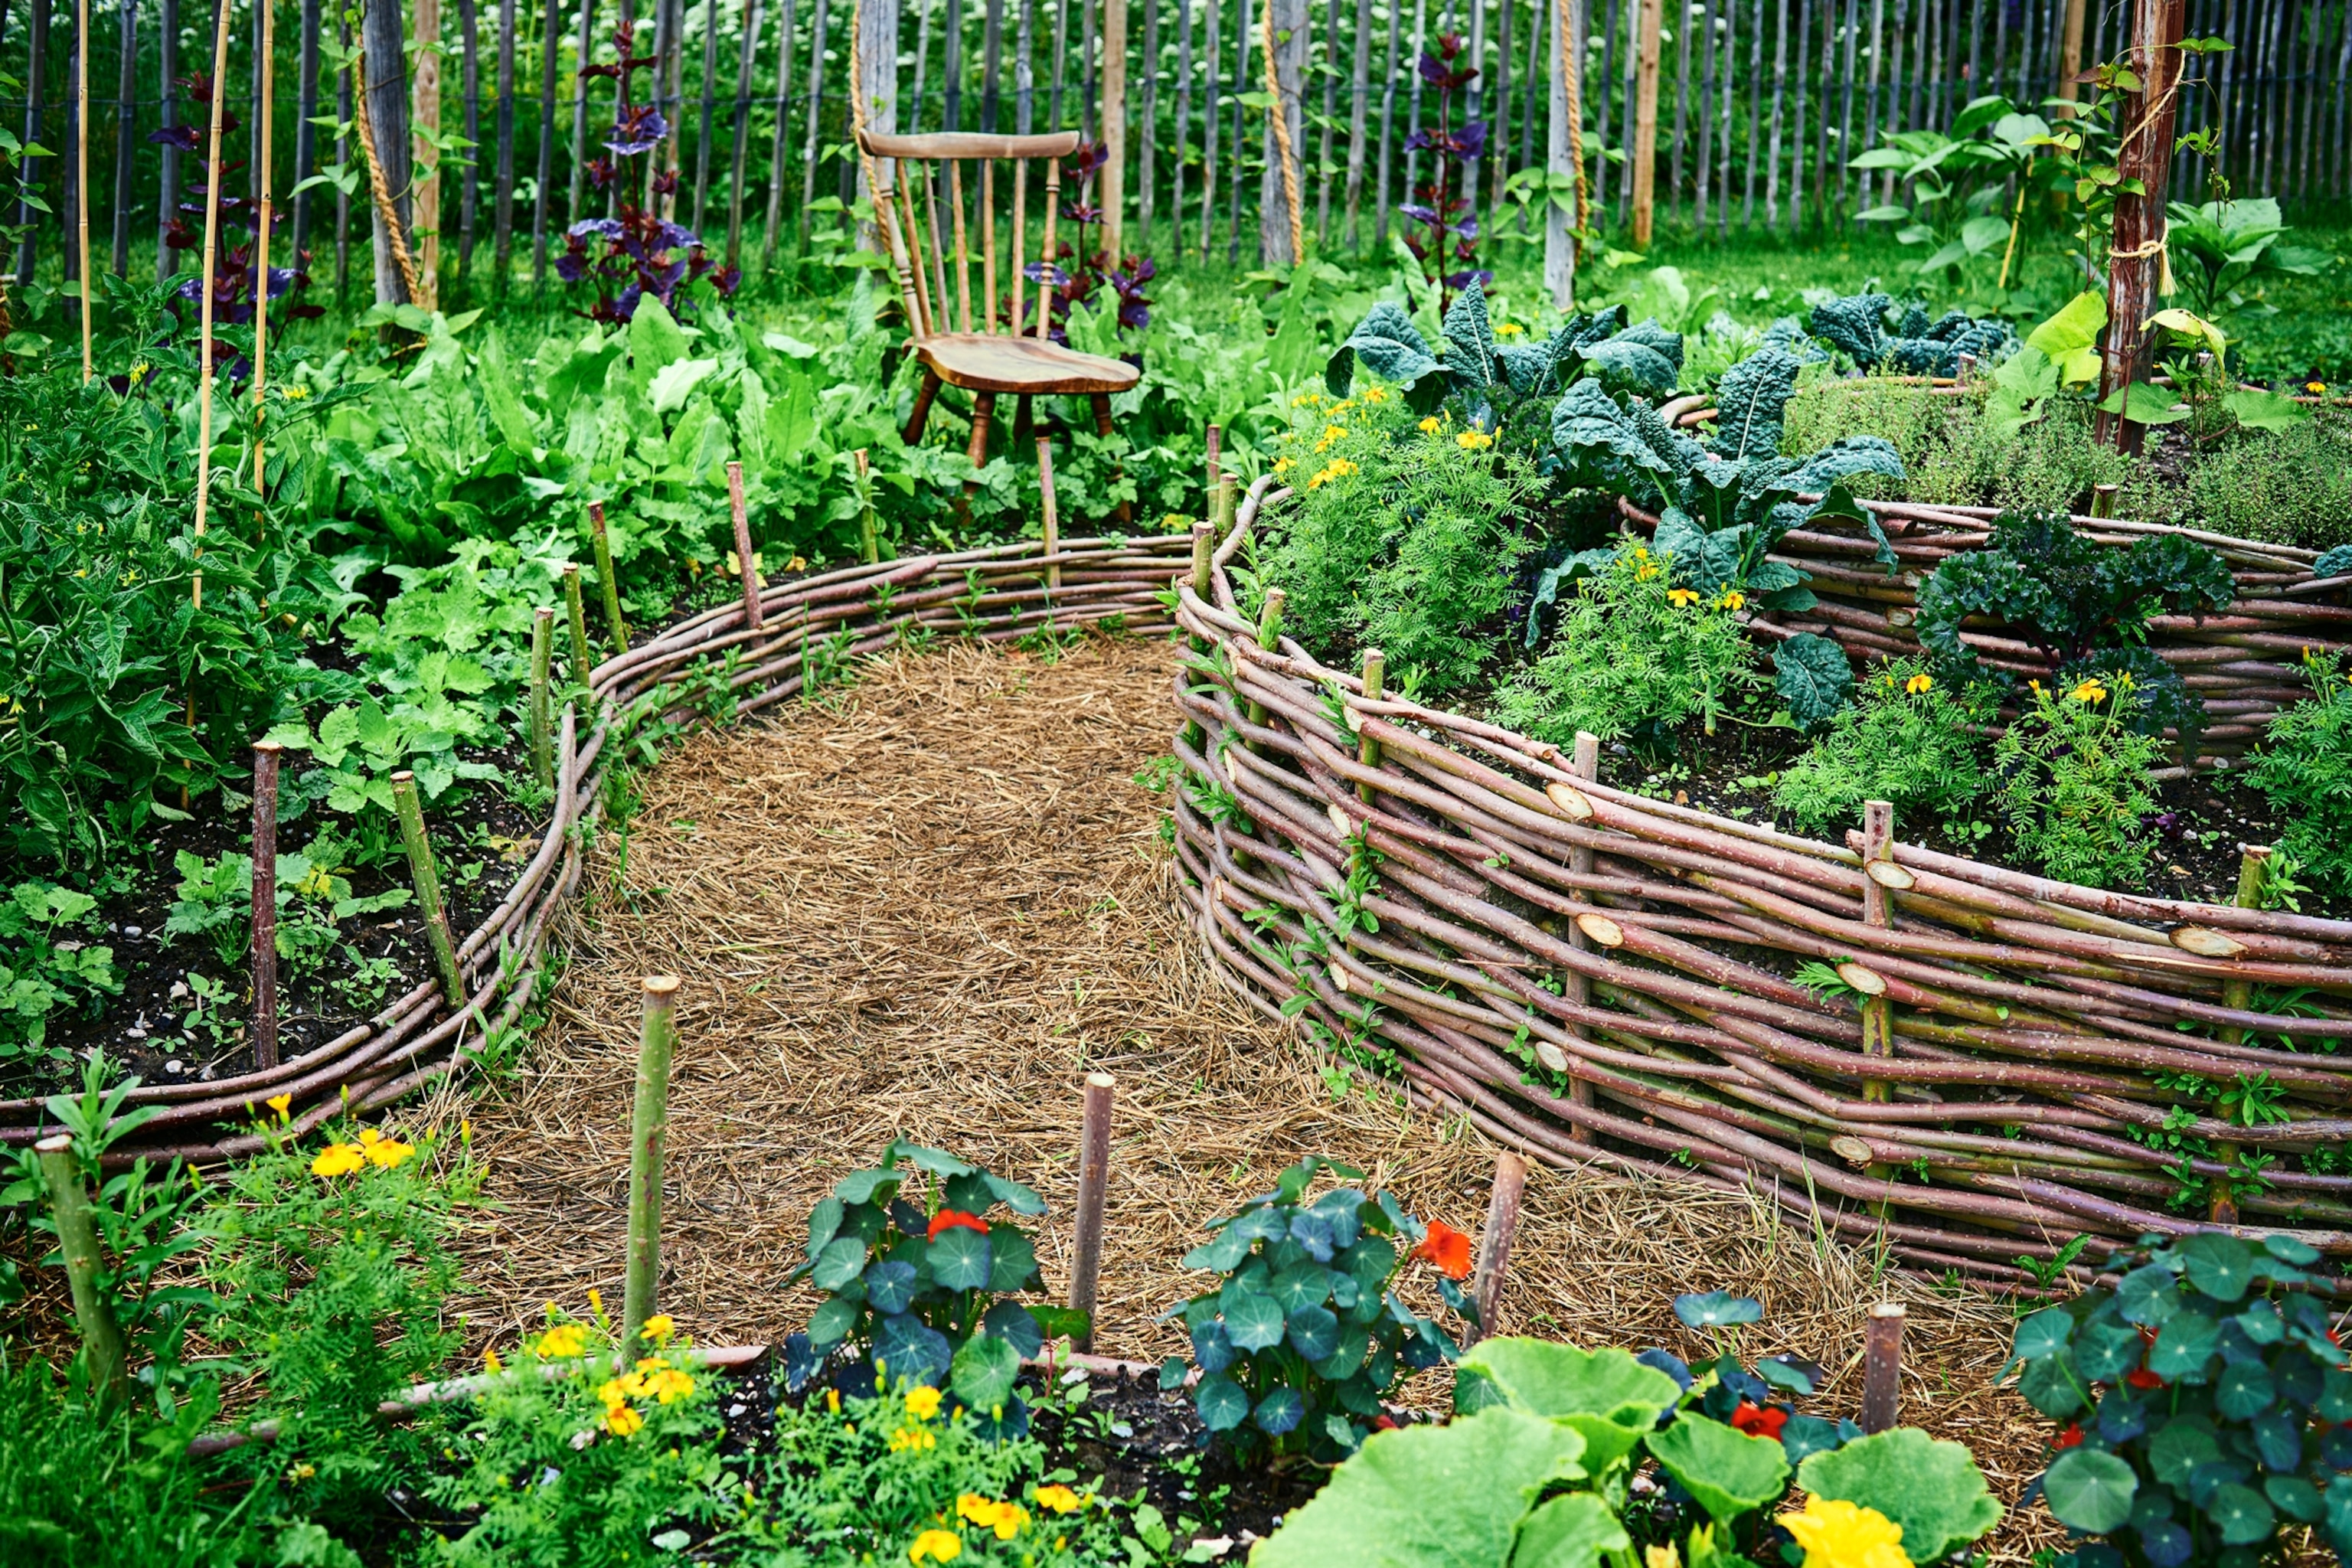 Picture of vegetable garden with fences around beds made of twigs.